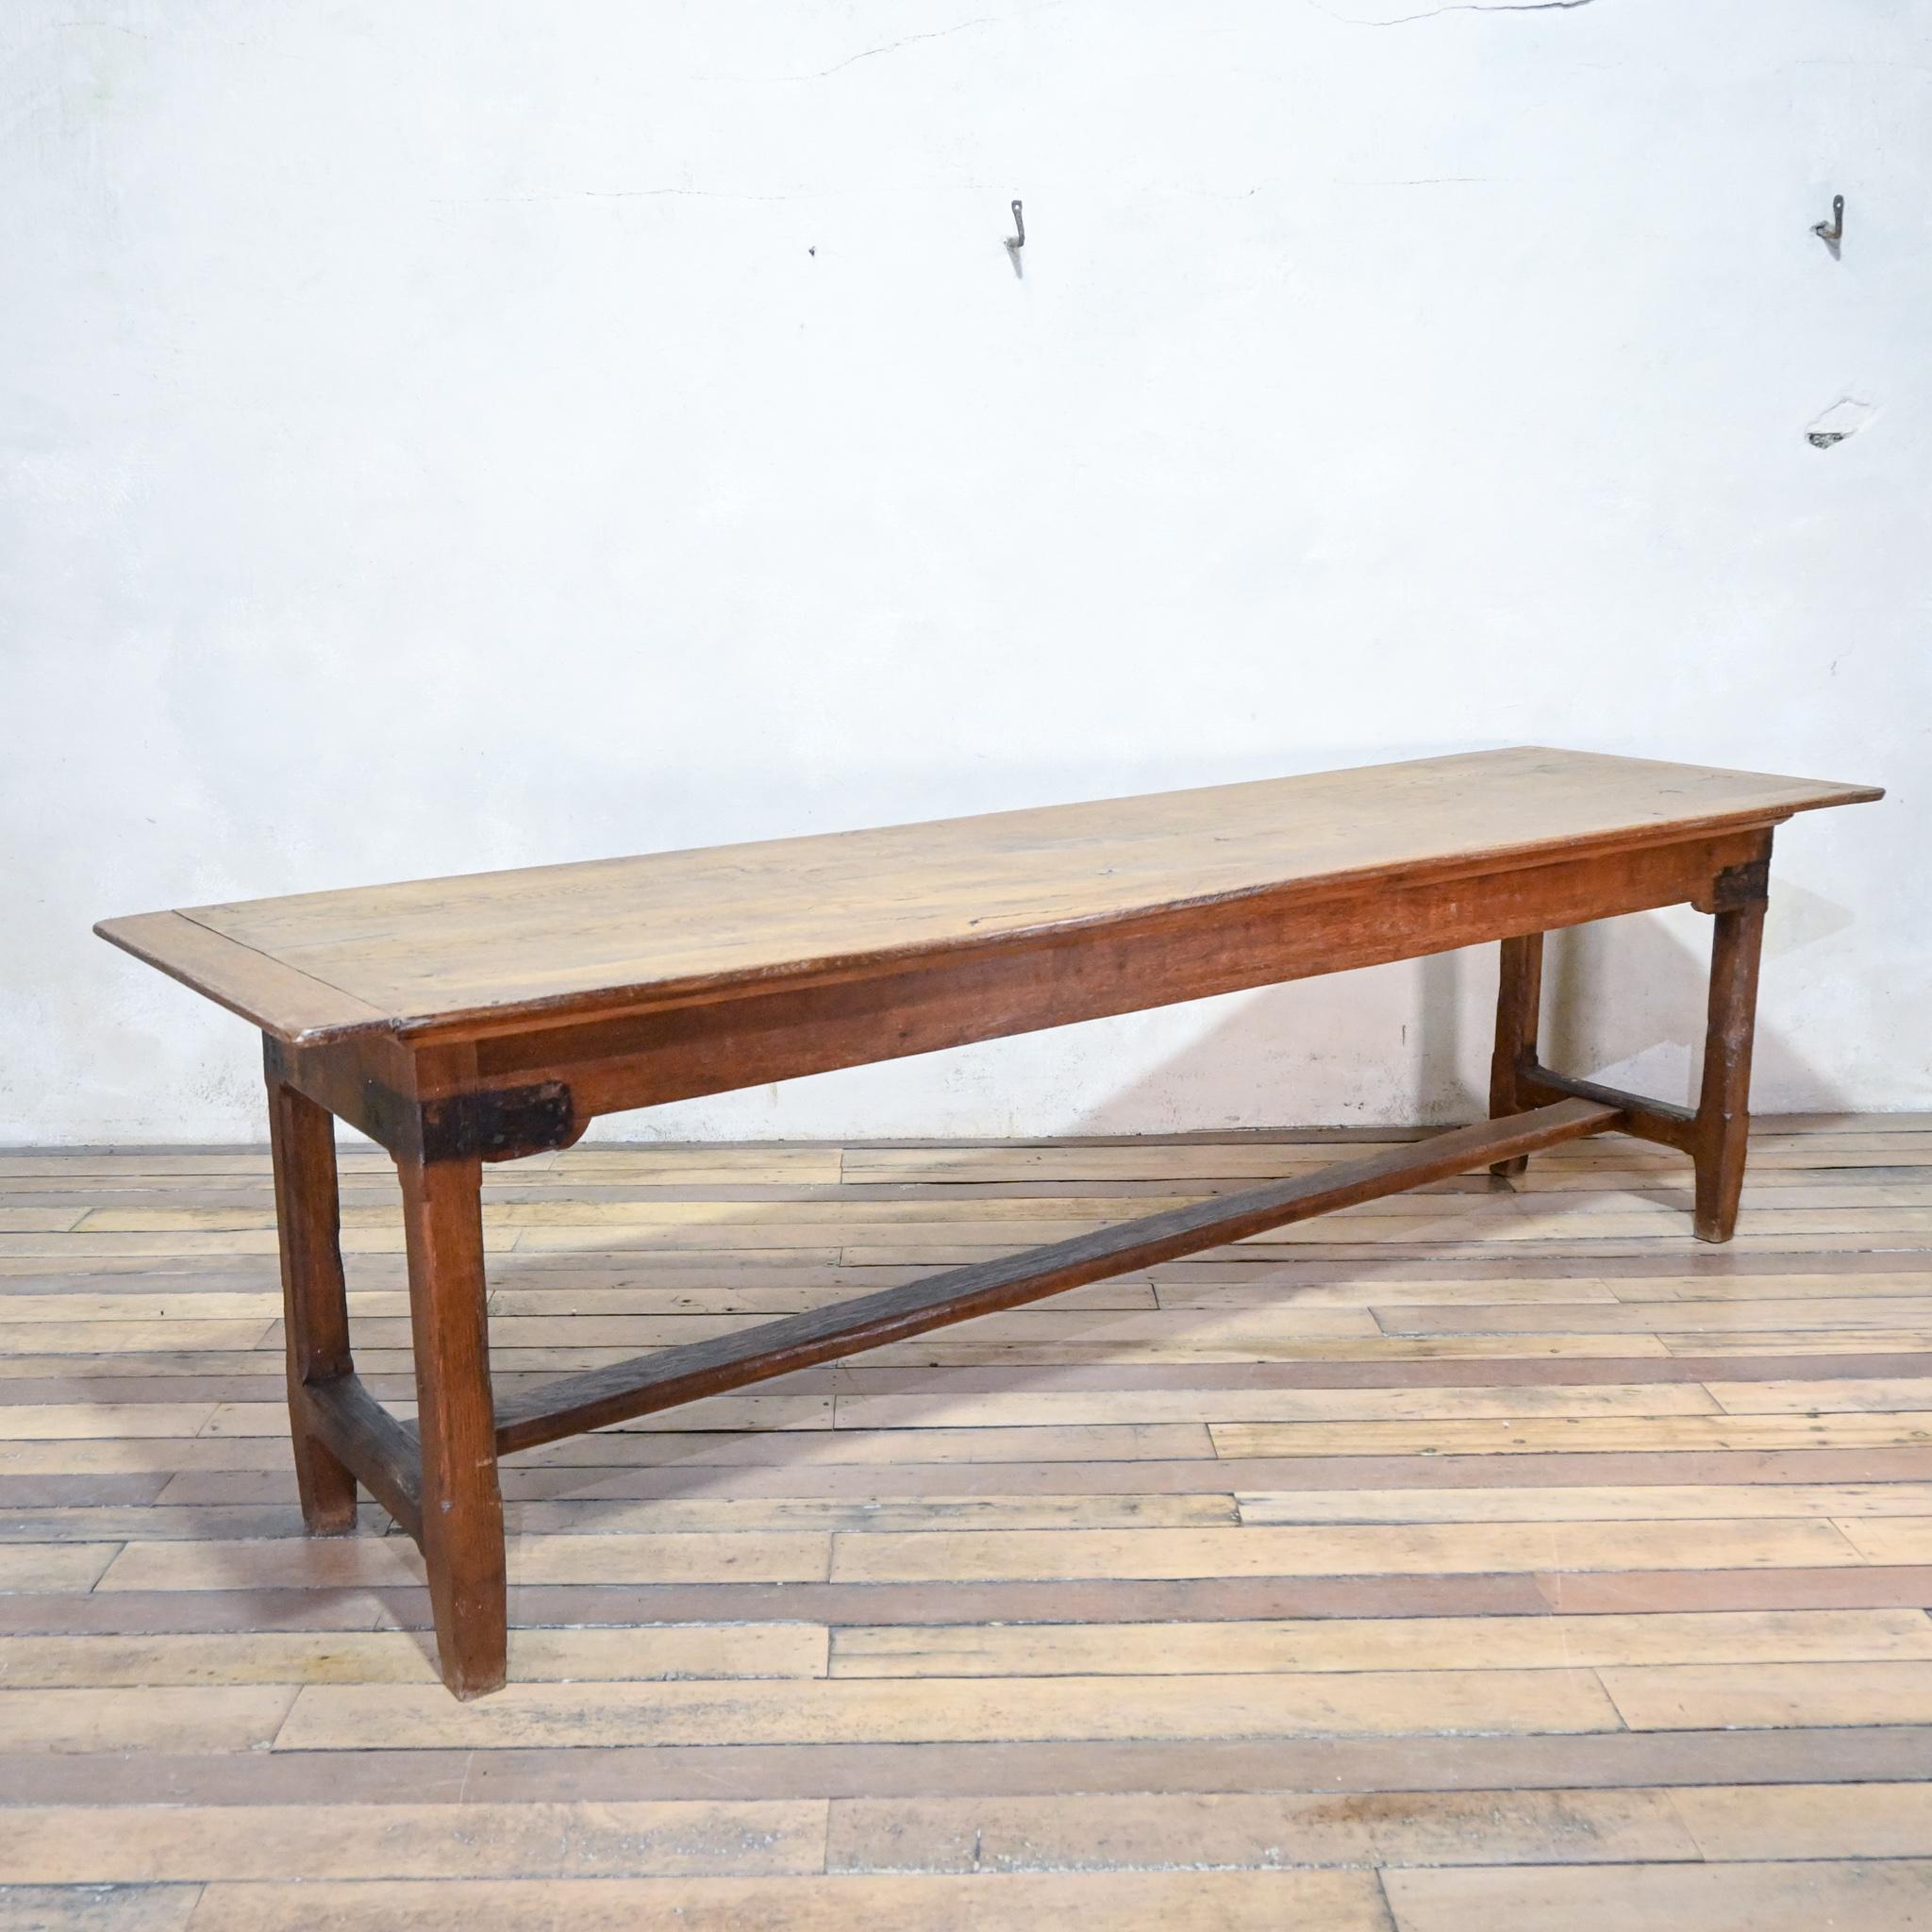 A long 19th century french oak farmhouse refectory table. A very architecturally pleasing design raised on slightly tapering legs. United by a central stretcher, which appears to have been replaced at some point during the mid 20th century.